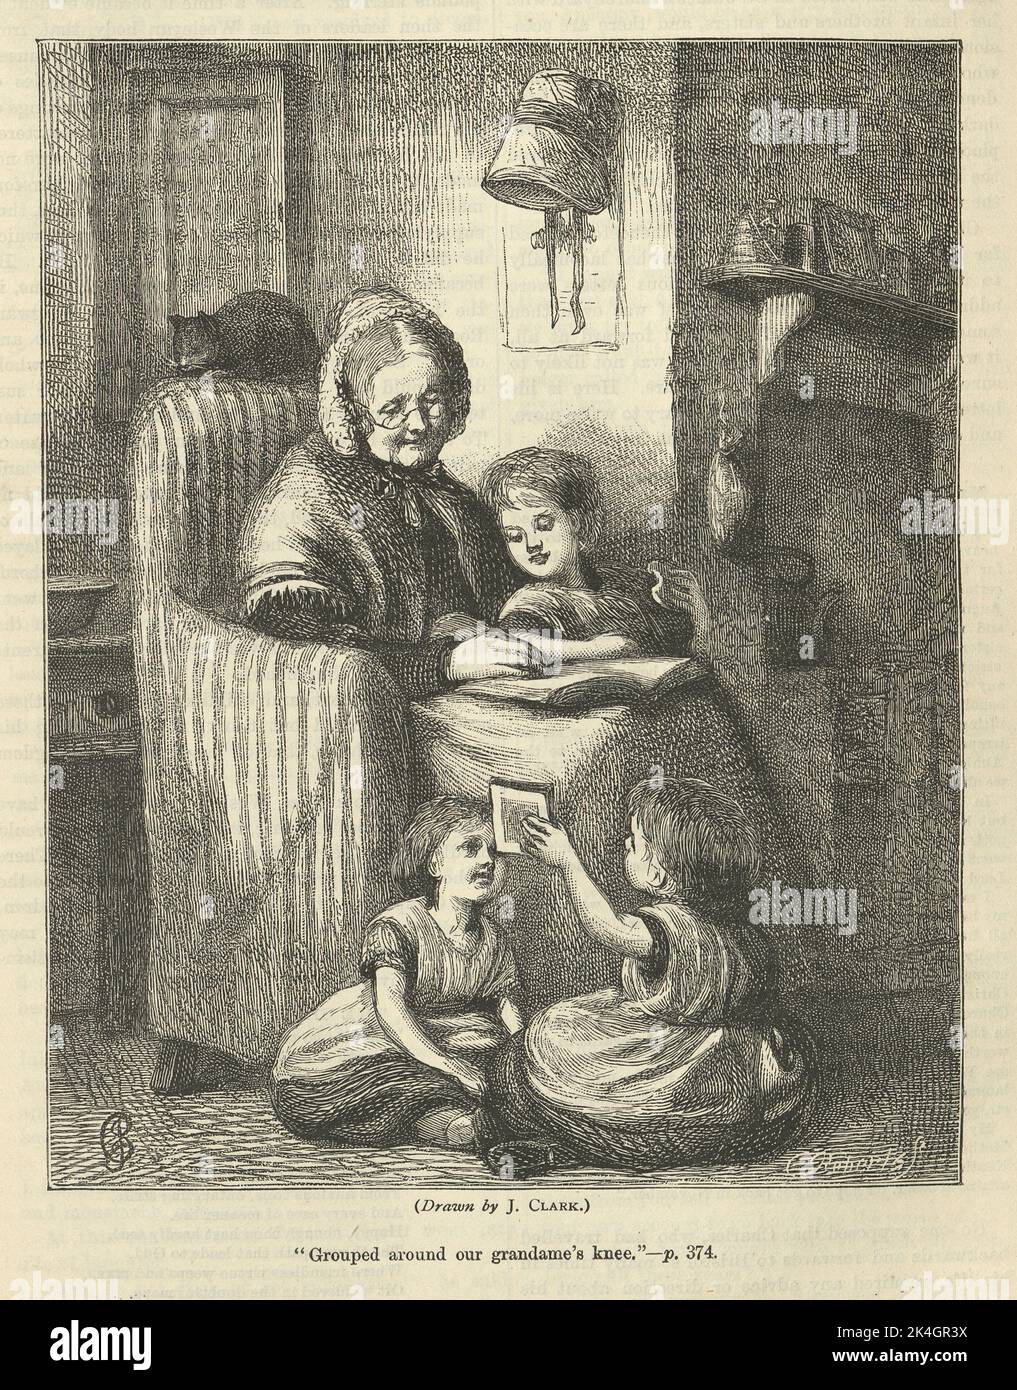 Vintage illustration Grandmother reading stories to her grandchildren, playing, Victorian, 1870s, 19th Century. Grouped around our grandame's knee Stock Photo